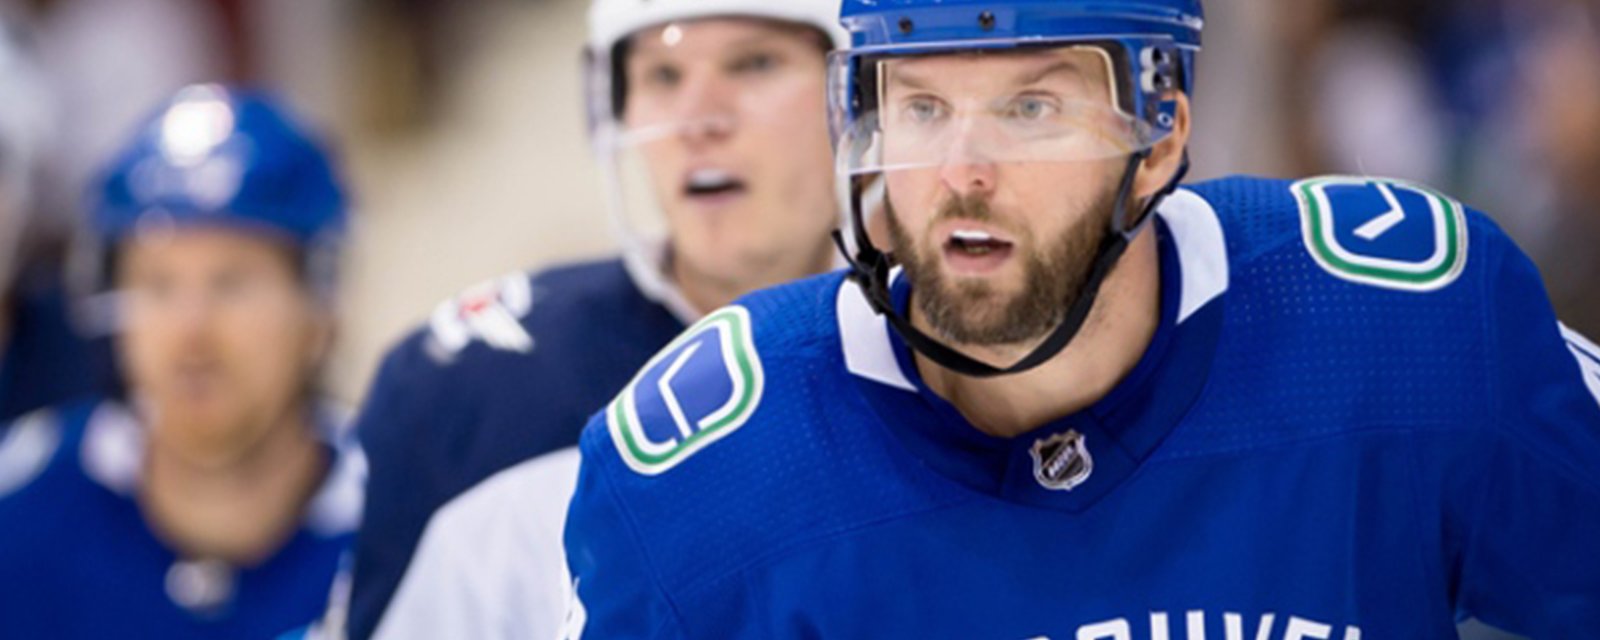 Rumor: Could the Canucks get in on trade action?